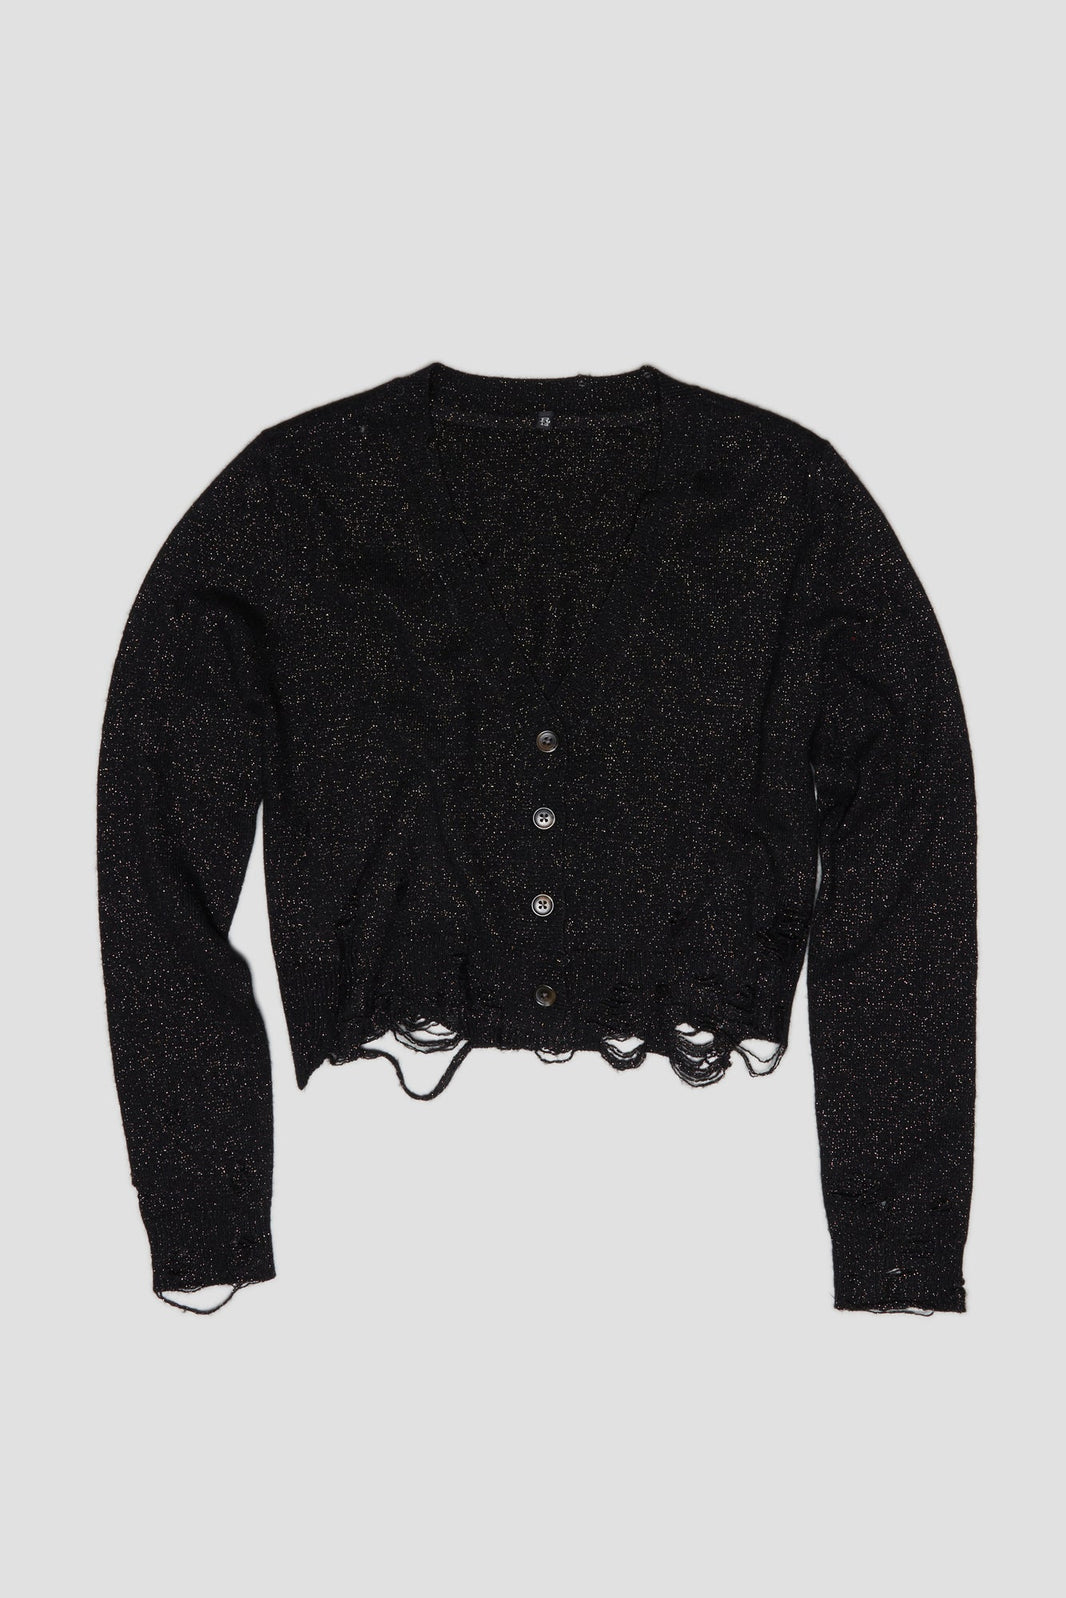 Women's Sweaters | R13 Denim Official Site – Page 2